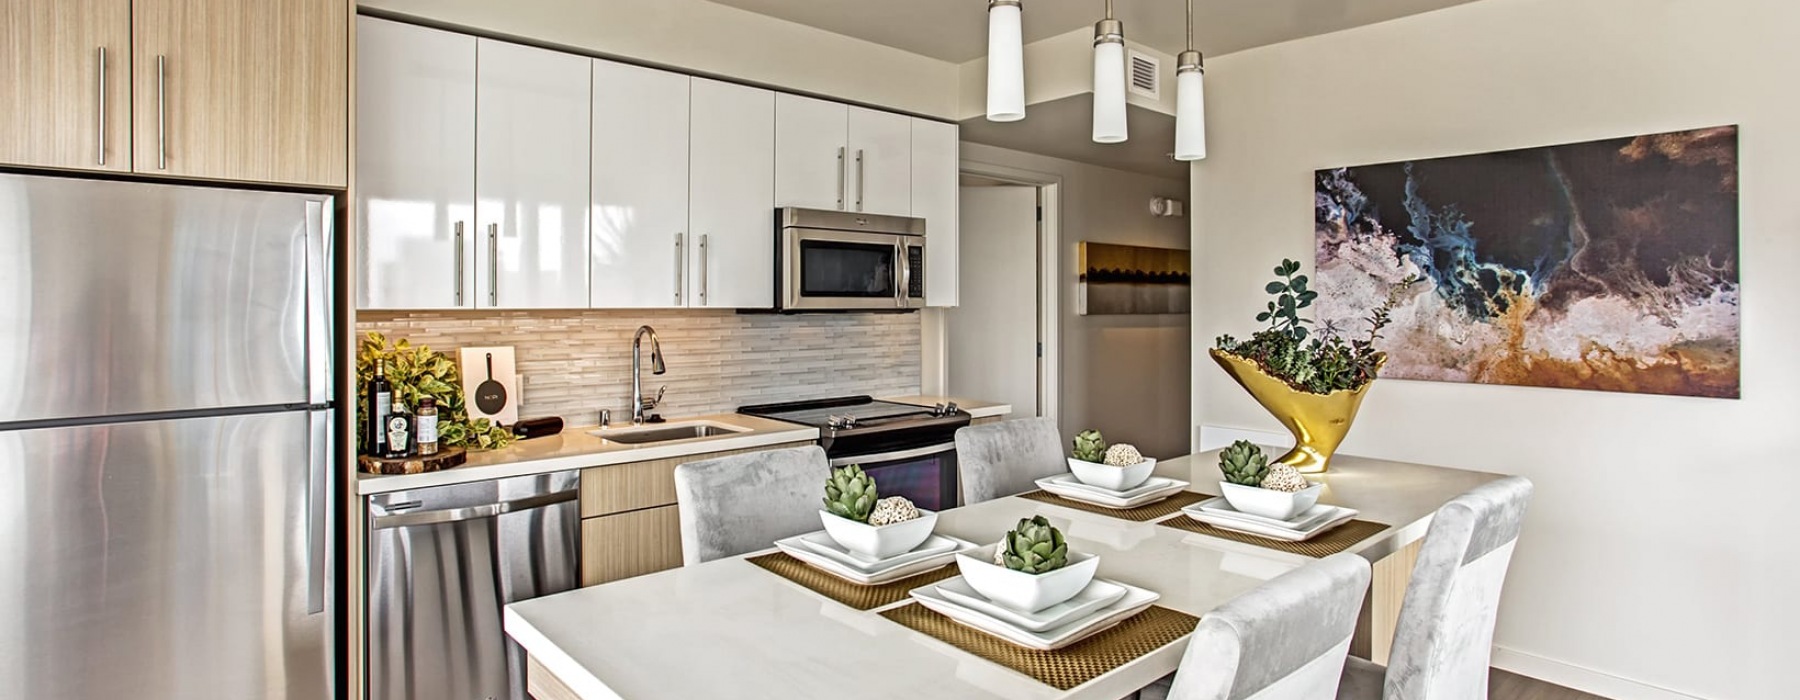 Apartments for Rent in San Francisco, CA - Solaire Kitchen with stainless steel appliances, and modern wood cabinets